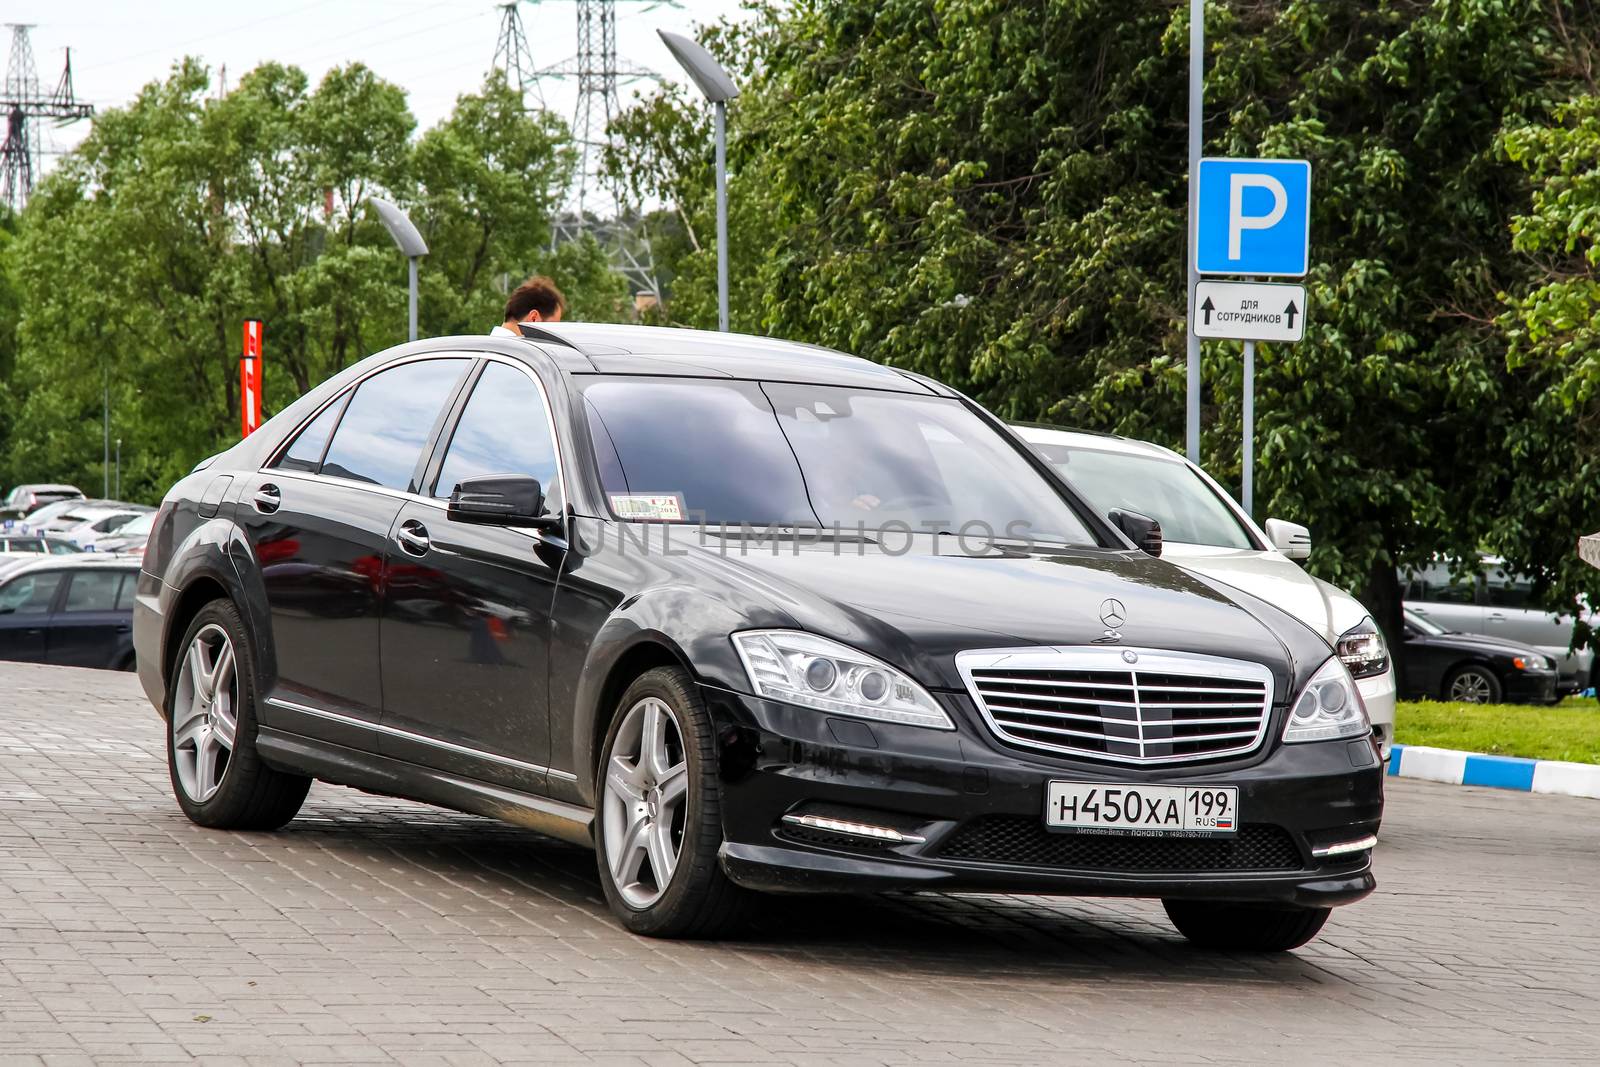 MOSCOW, RUSSIA - JUNE 2, 2012: Motor car Mercedes-Benz W221 S-class at the city street.